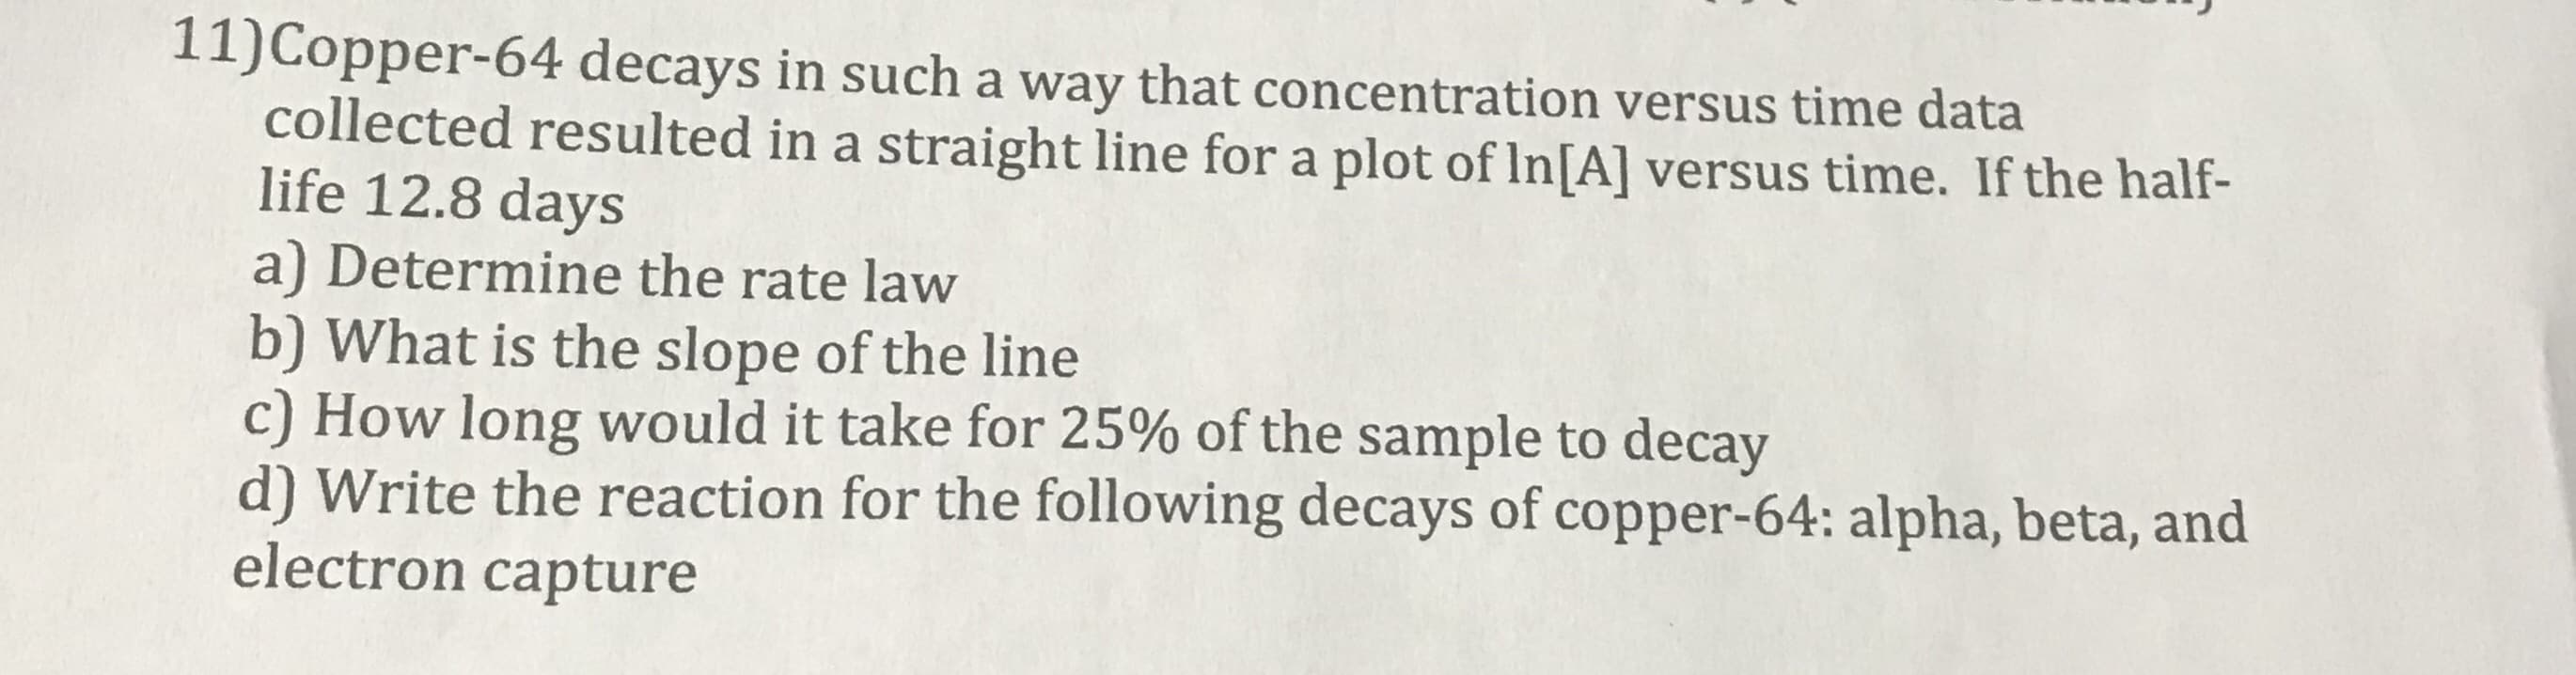 11)Copper-64 decays in such a way that concentration versus time data
collected resulted in a straight line for a plot of In[A] versus time. If the half-
life 12.8 days
a) Determine the rate law
b) What is the slope of the line
c) How long would it take for 25% of the sample to decay
